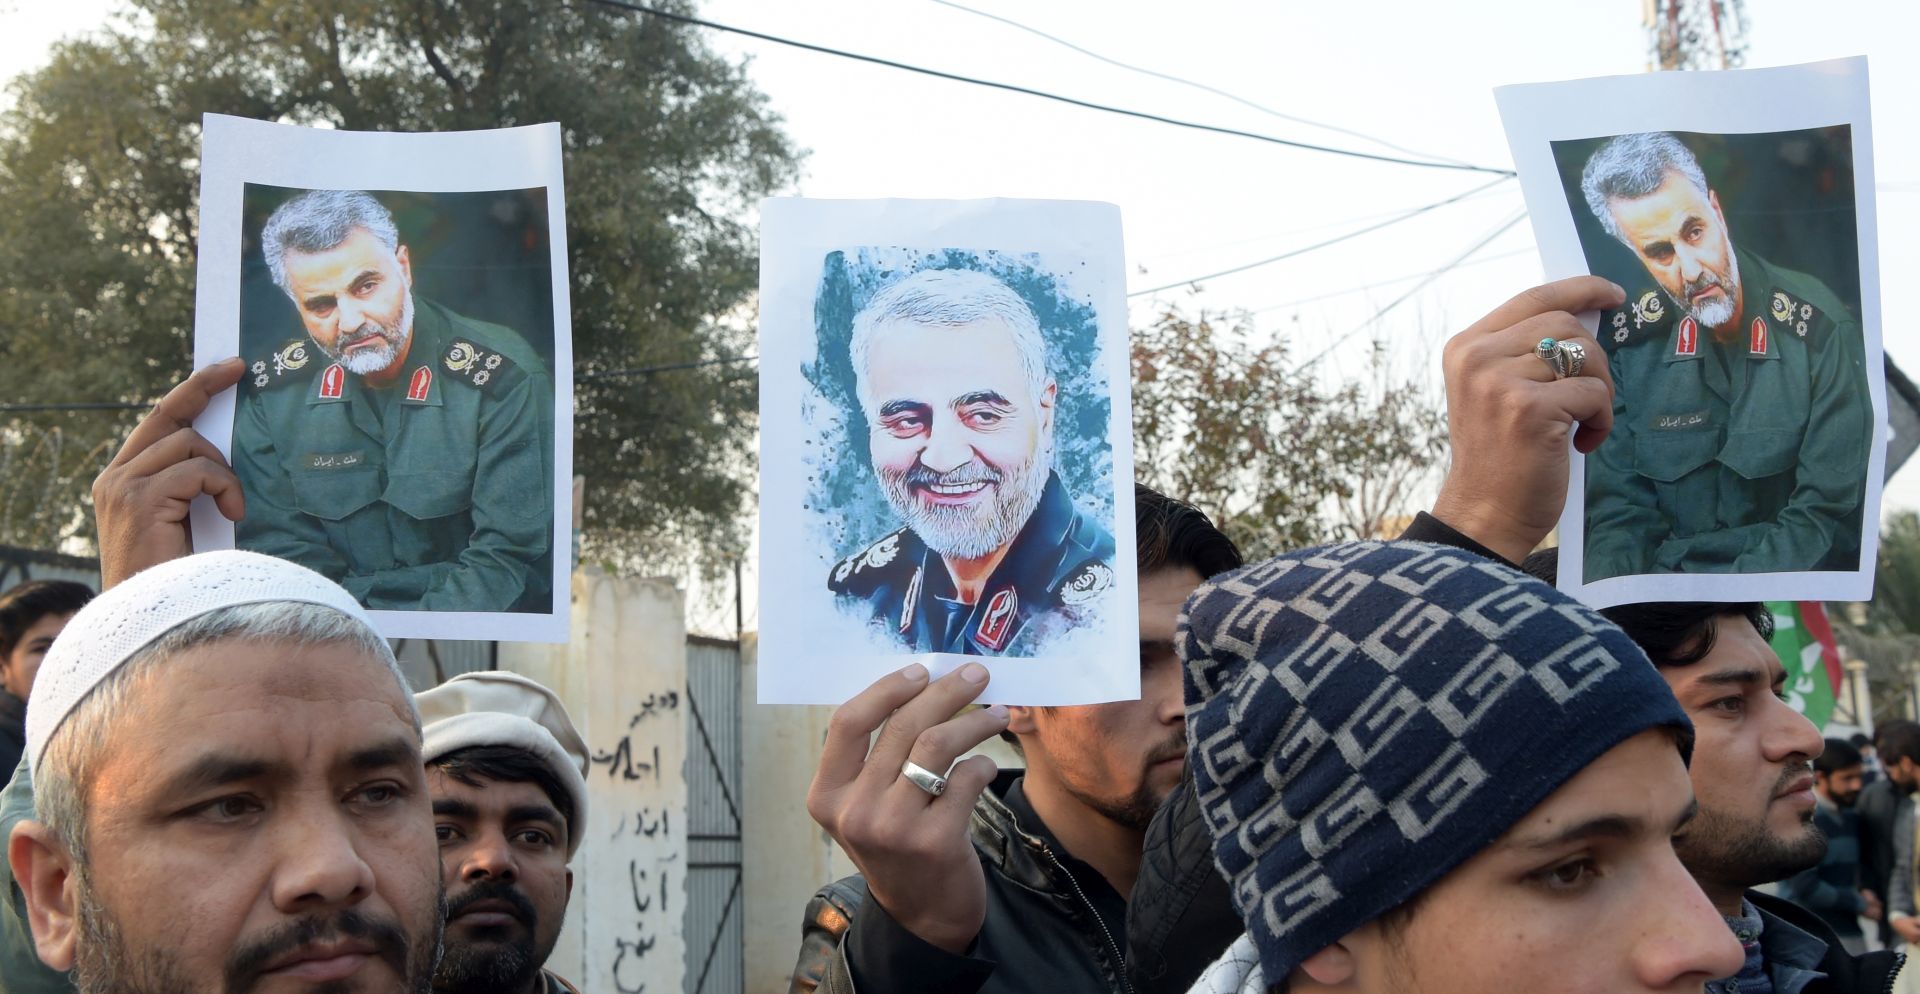 epa08100299 Pakistani Shi'ite Muslims hold pictures of General Qasem Soleimani, the head of Iran's Islamic Revolutionary Guard Corps' elite Quds Force, during a protest against the USA, in Peshawar, Pakistan, 03 January 2020. General Qasem Soleimani, was killed in an airstrike on 03 January, in Baghdad ordered by the United States president, the Pentagon said. General Soleimani was in charge of Iran's foreign policy strategy as the head of the Quds Force, an elite wing of the Islamic Revolutionary Guard Corps, which the US designated as a terror organization. The Quds Force holds sway over a raft of Shia militias across the region, from Lebanon to Syria and Iraq.  EPA/SOHAIL SHAHZAD